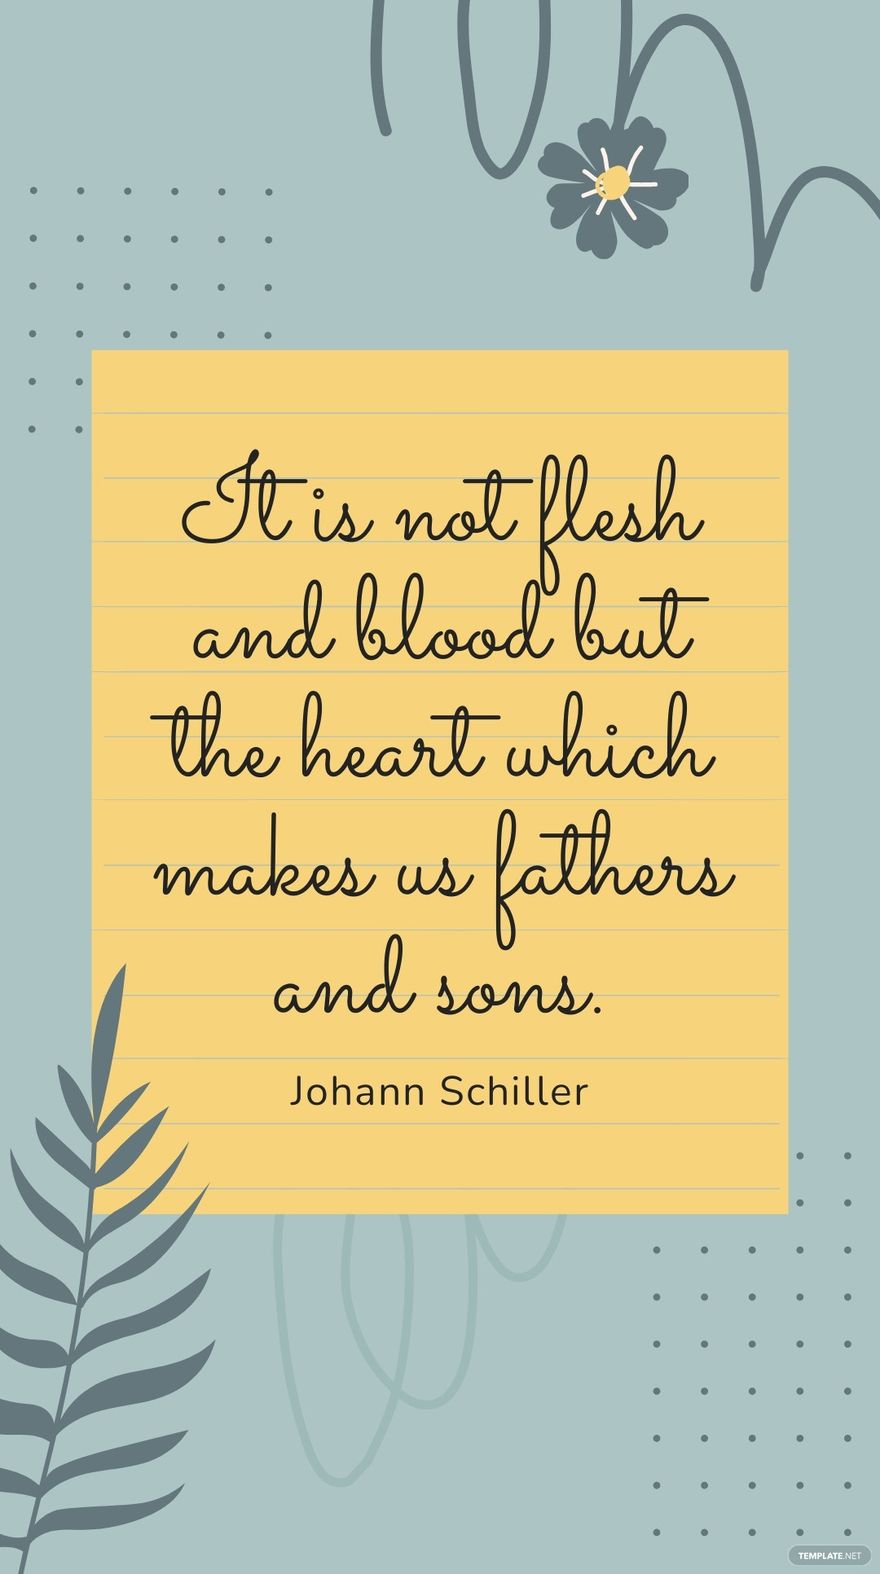 Johann Schiller - It is not flesh and blood but the heart which makes us fathers and sons. in JPG